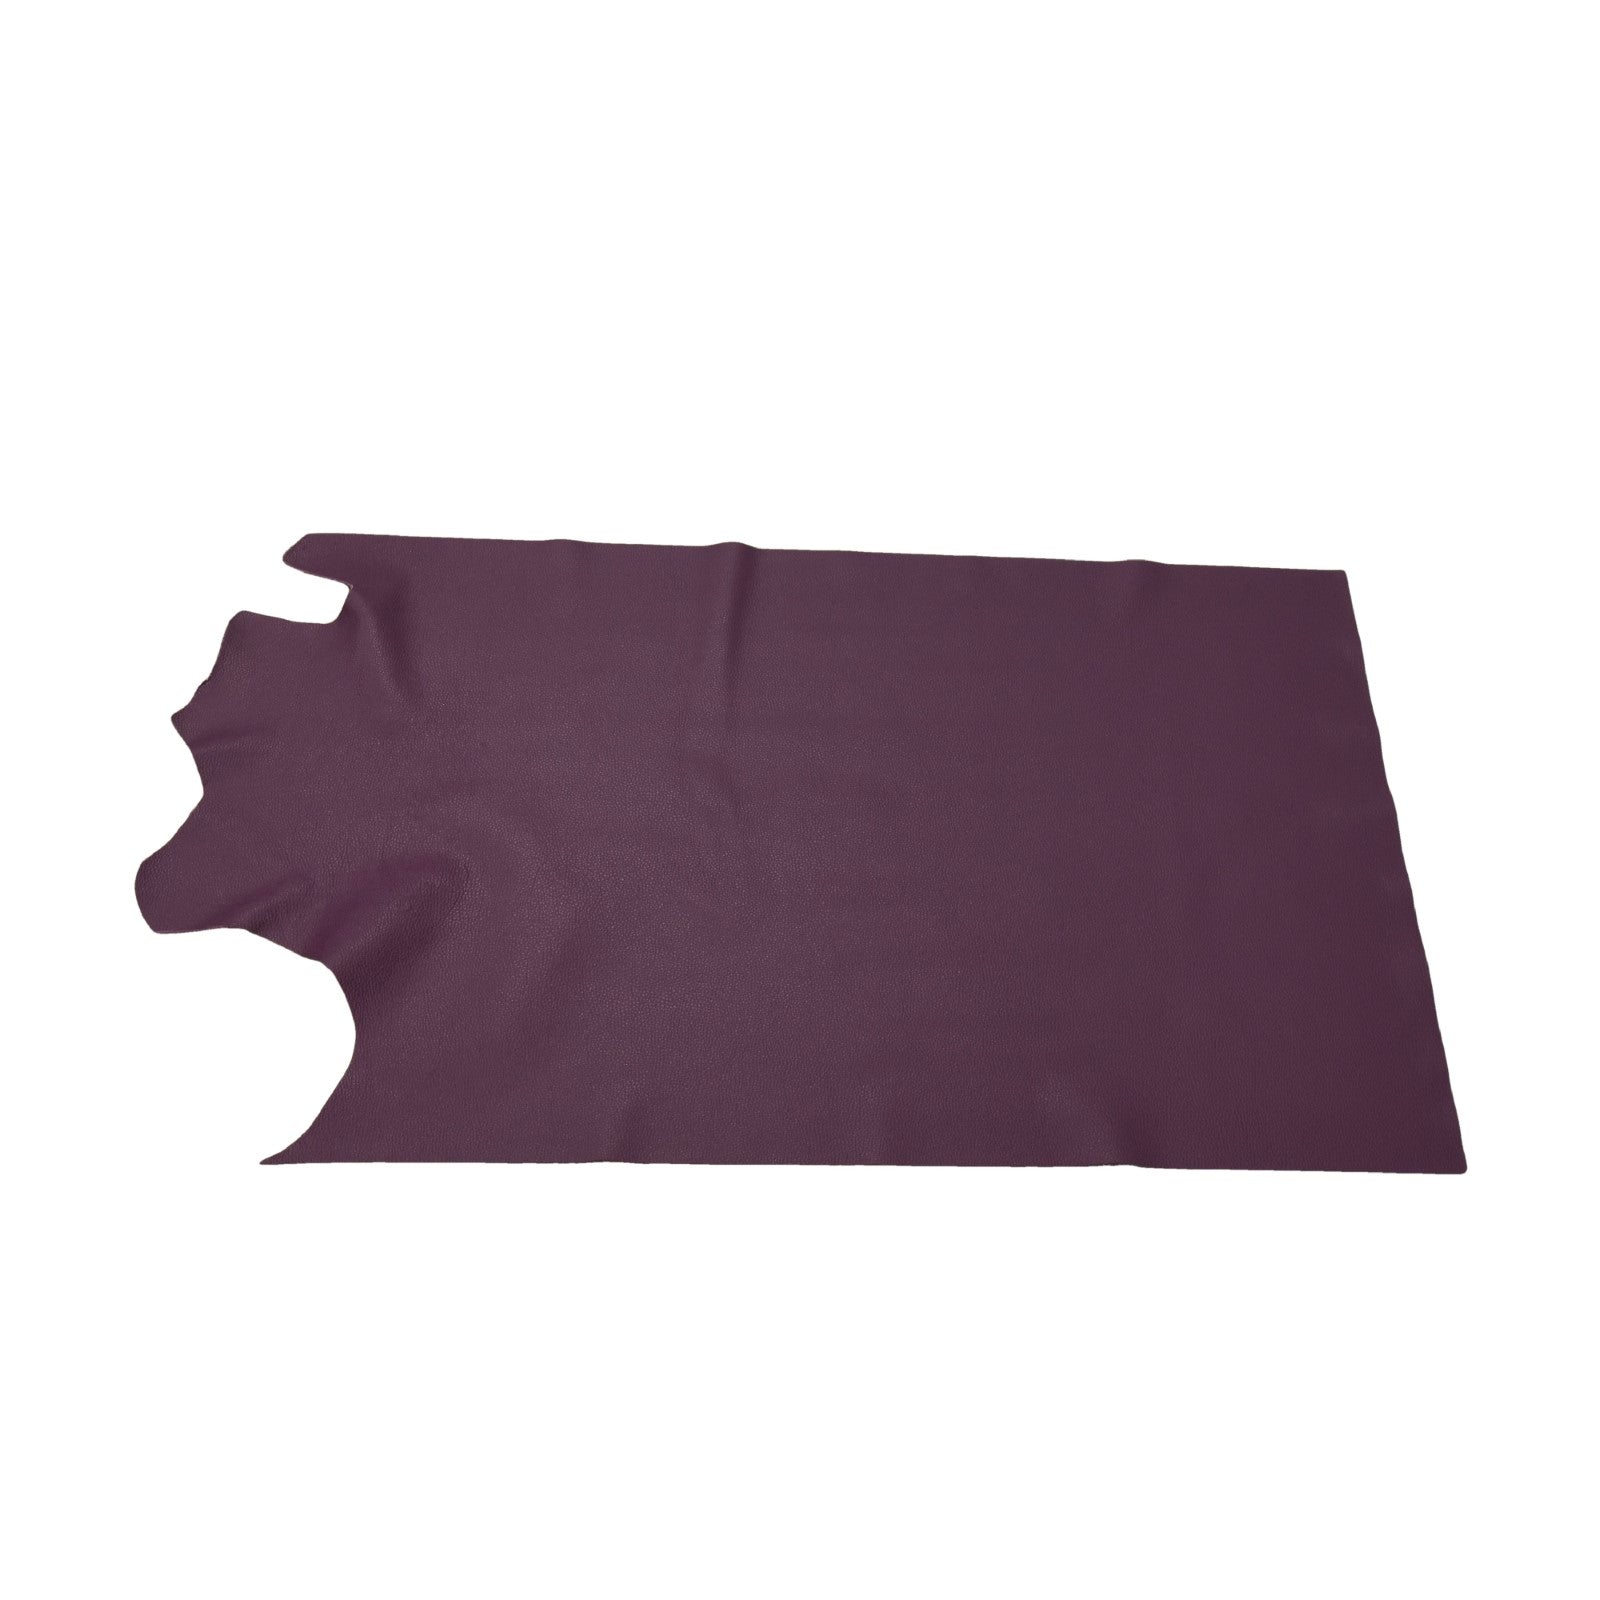 Napa Concord Grape, 3-4 oz Cow Hides, Tried n True, 6.5-7.5 Square Foot / Project Piece (Middle) | The Leather Guy